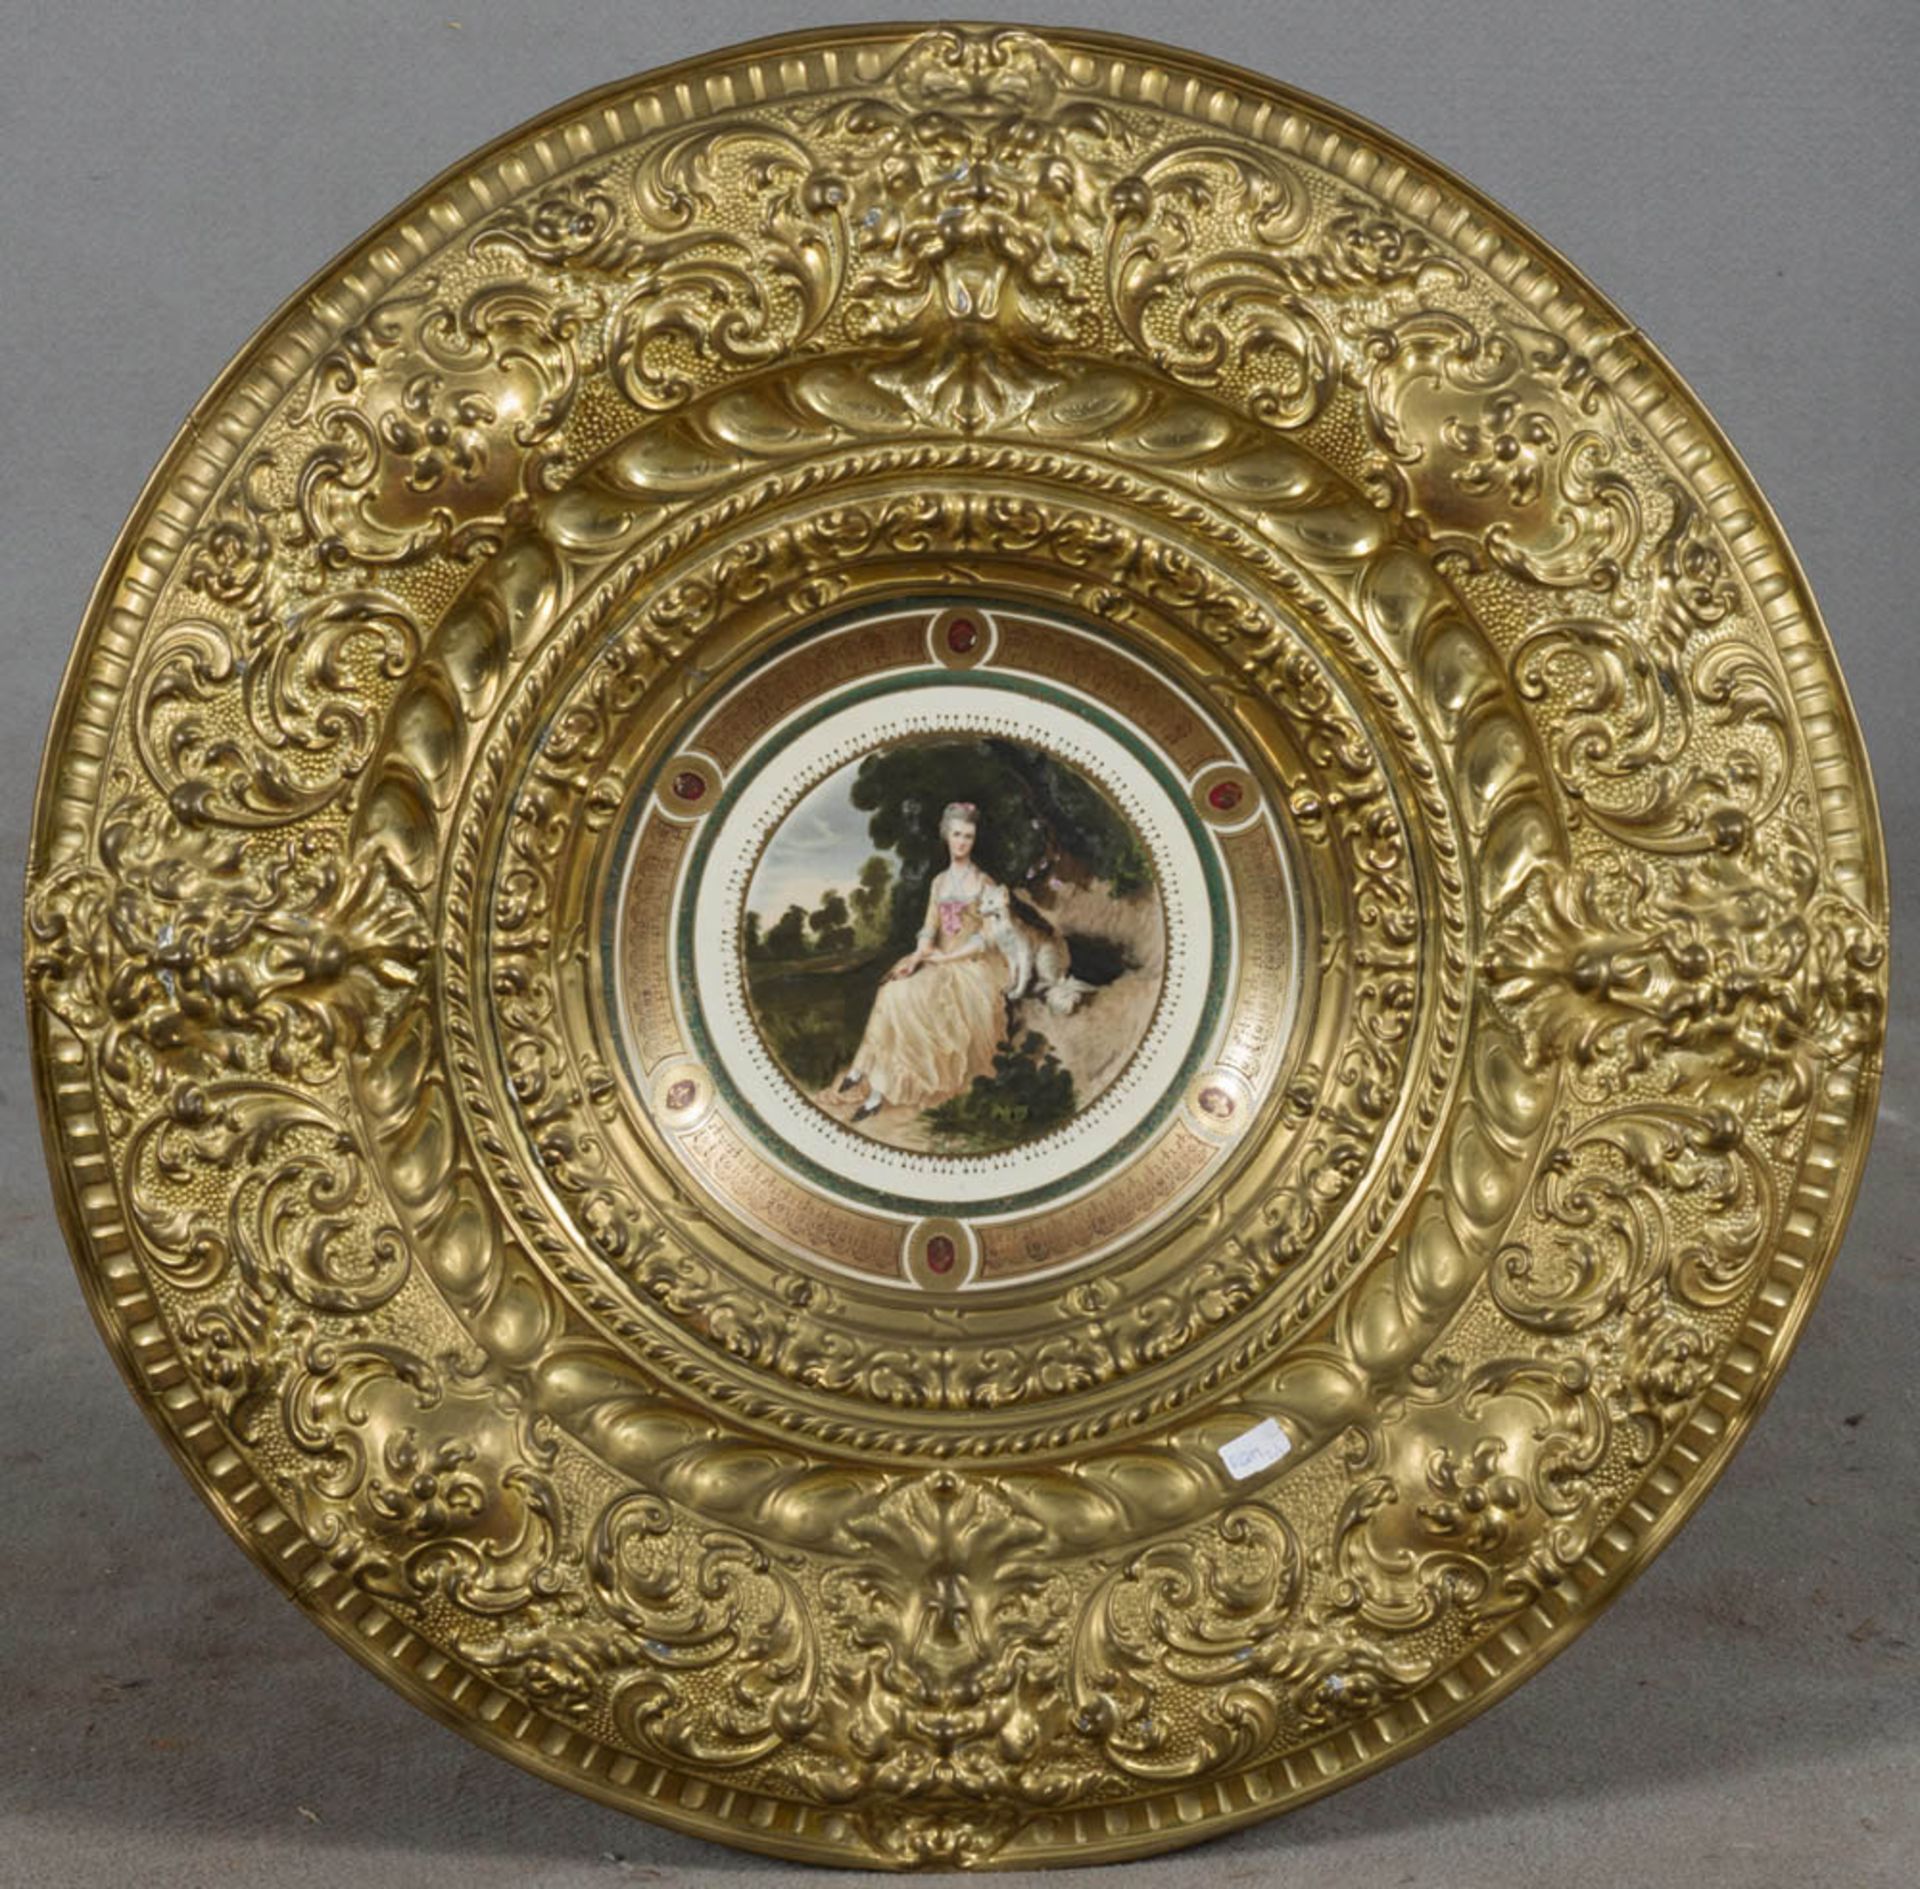 A PAIR OF PORCELAIN DISHES WITH FRAMES IN BRASS – END 19TH CENTURY